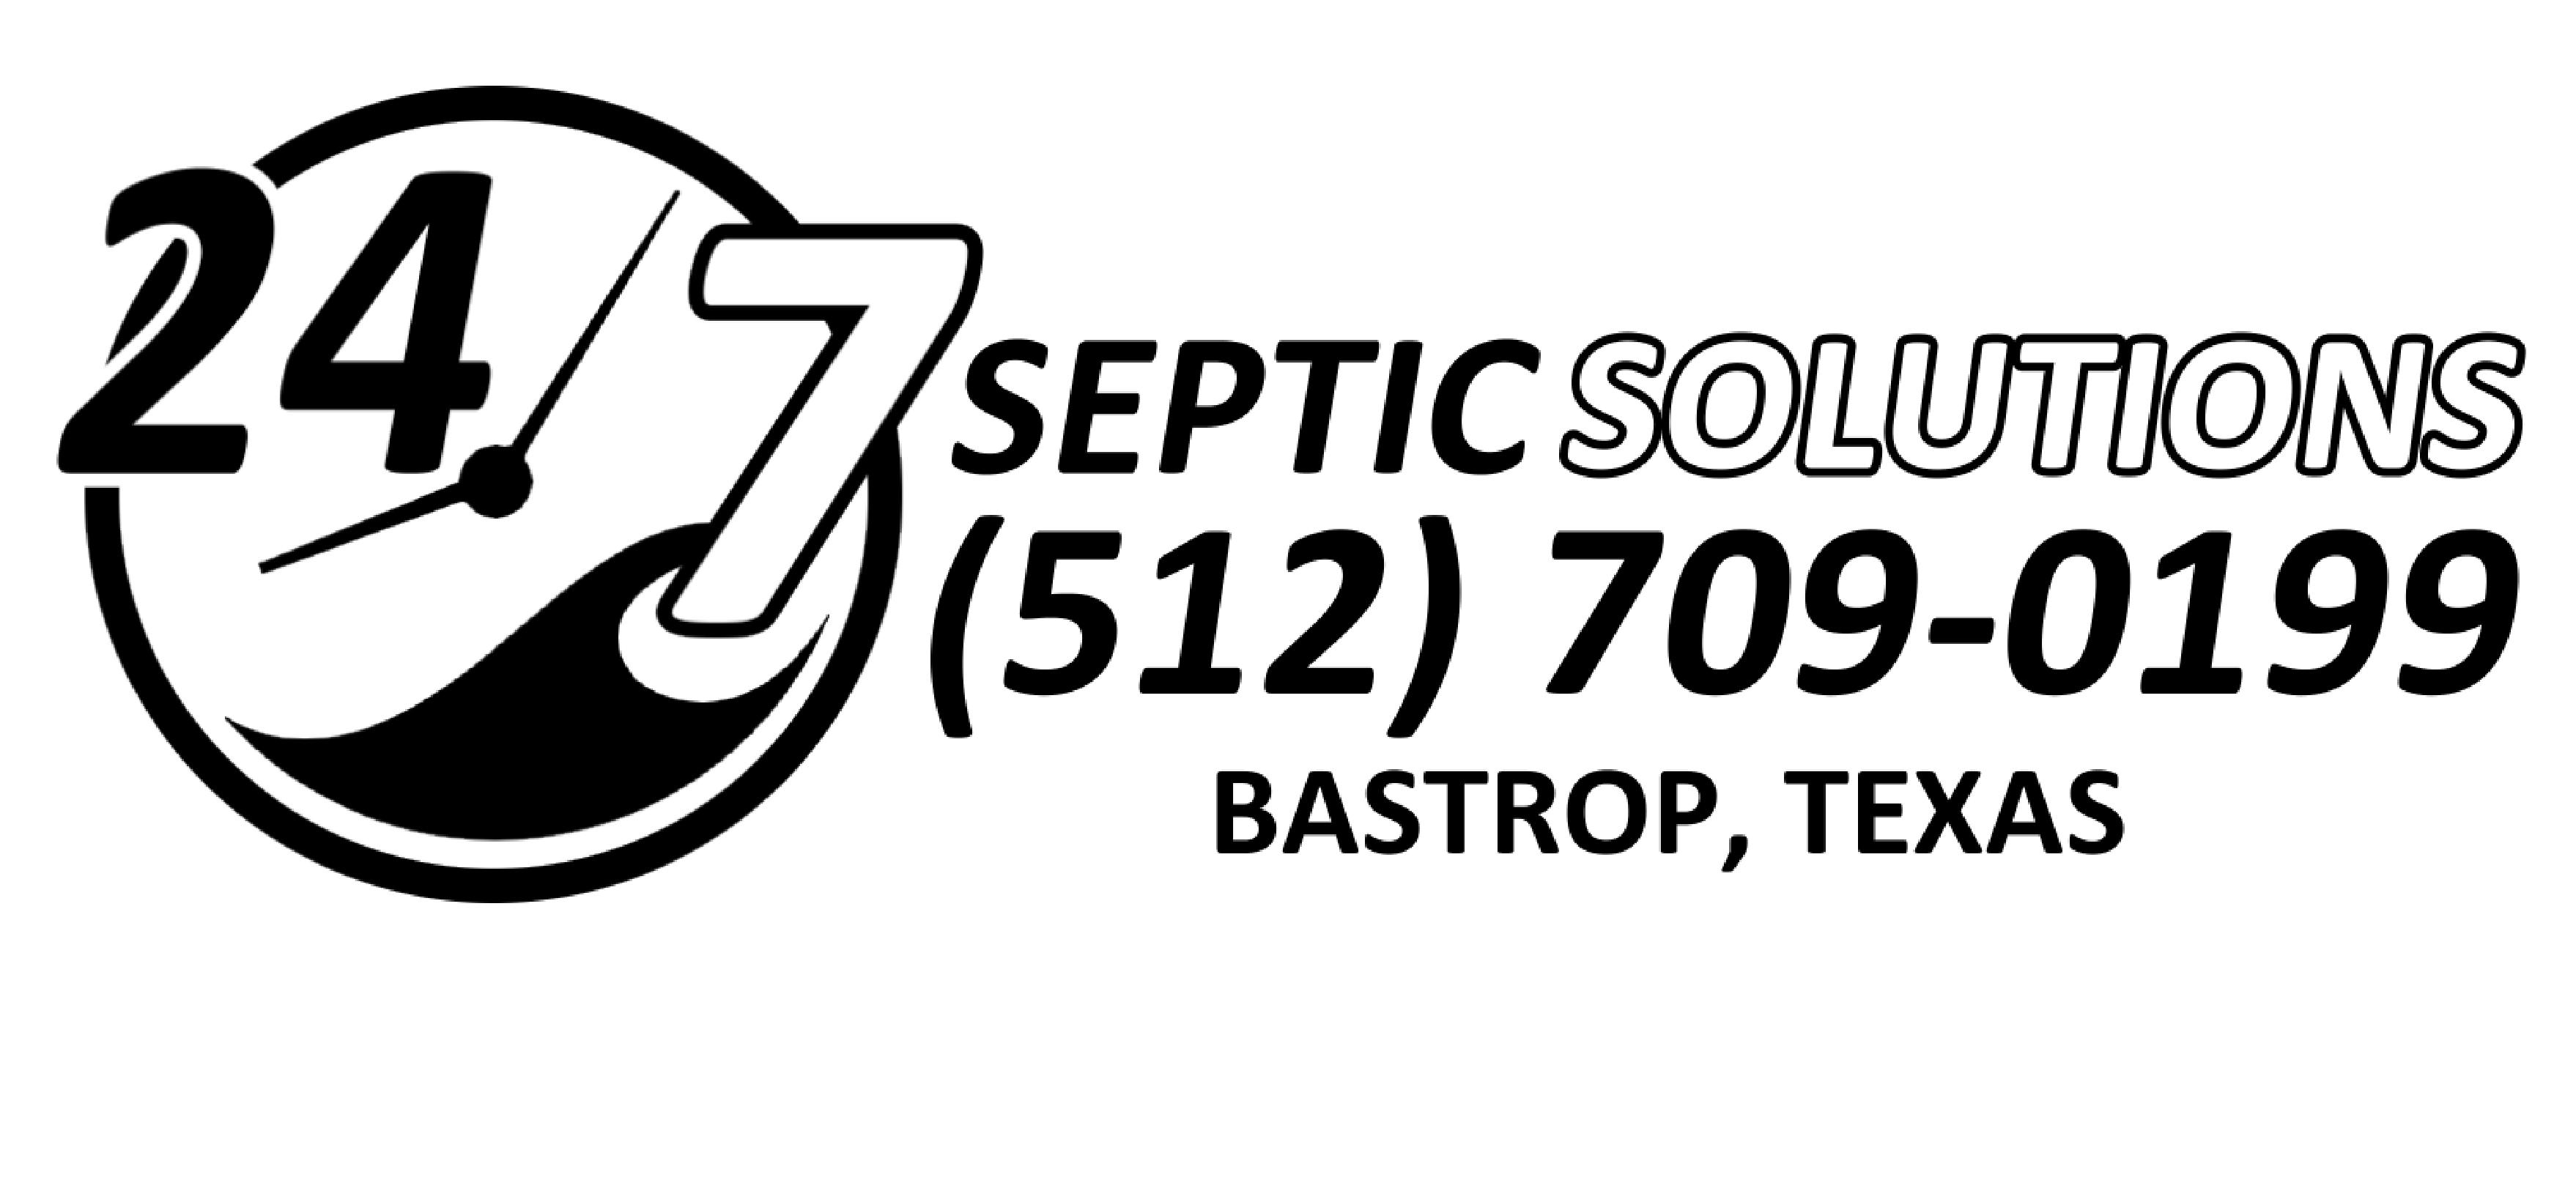 24/7 Septic Solutions Logo